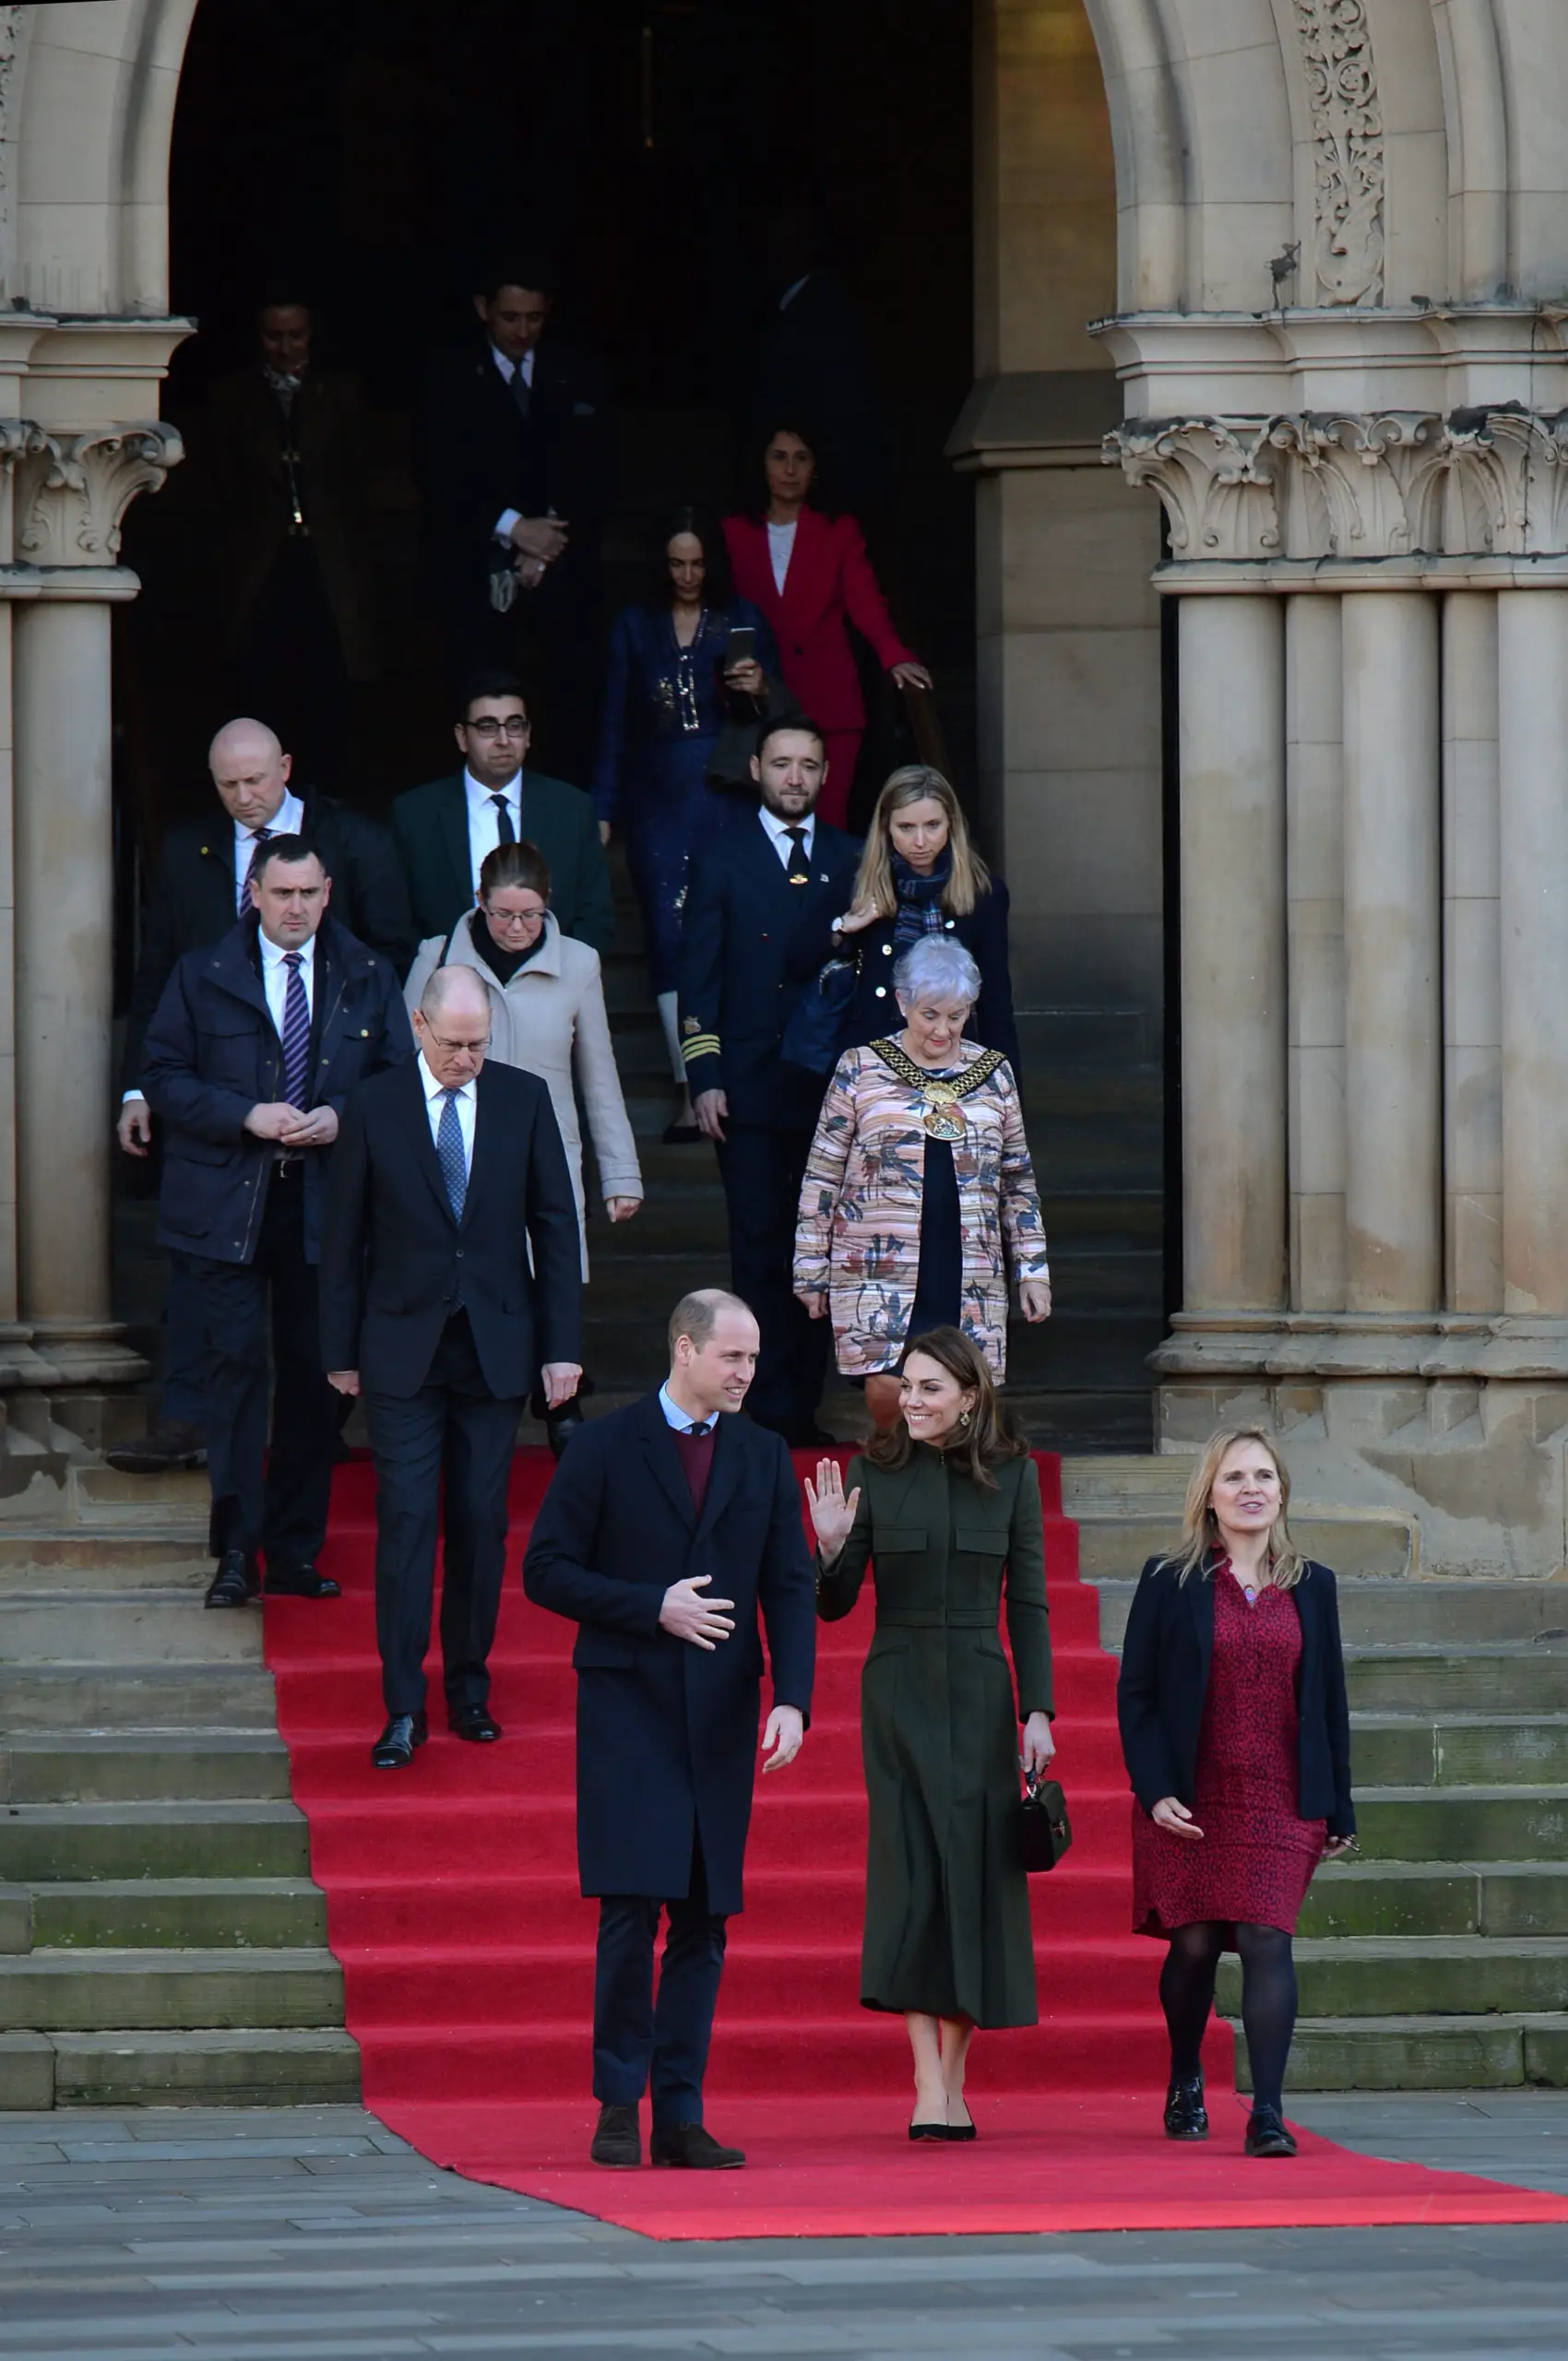 The Duke and Duchess of Cambridge started 2020 with a visit to Bradford